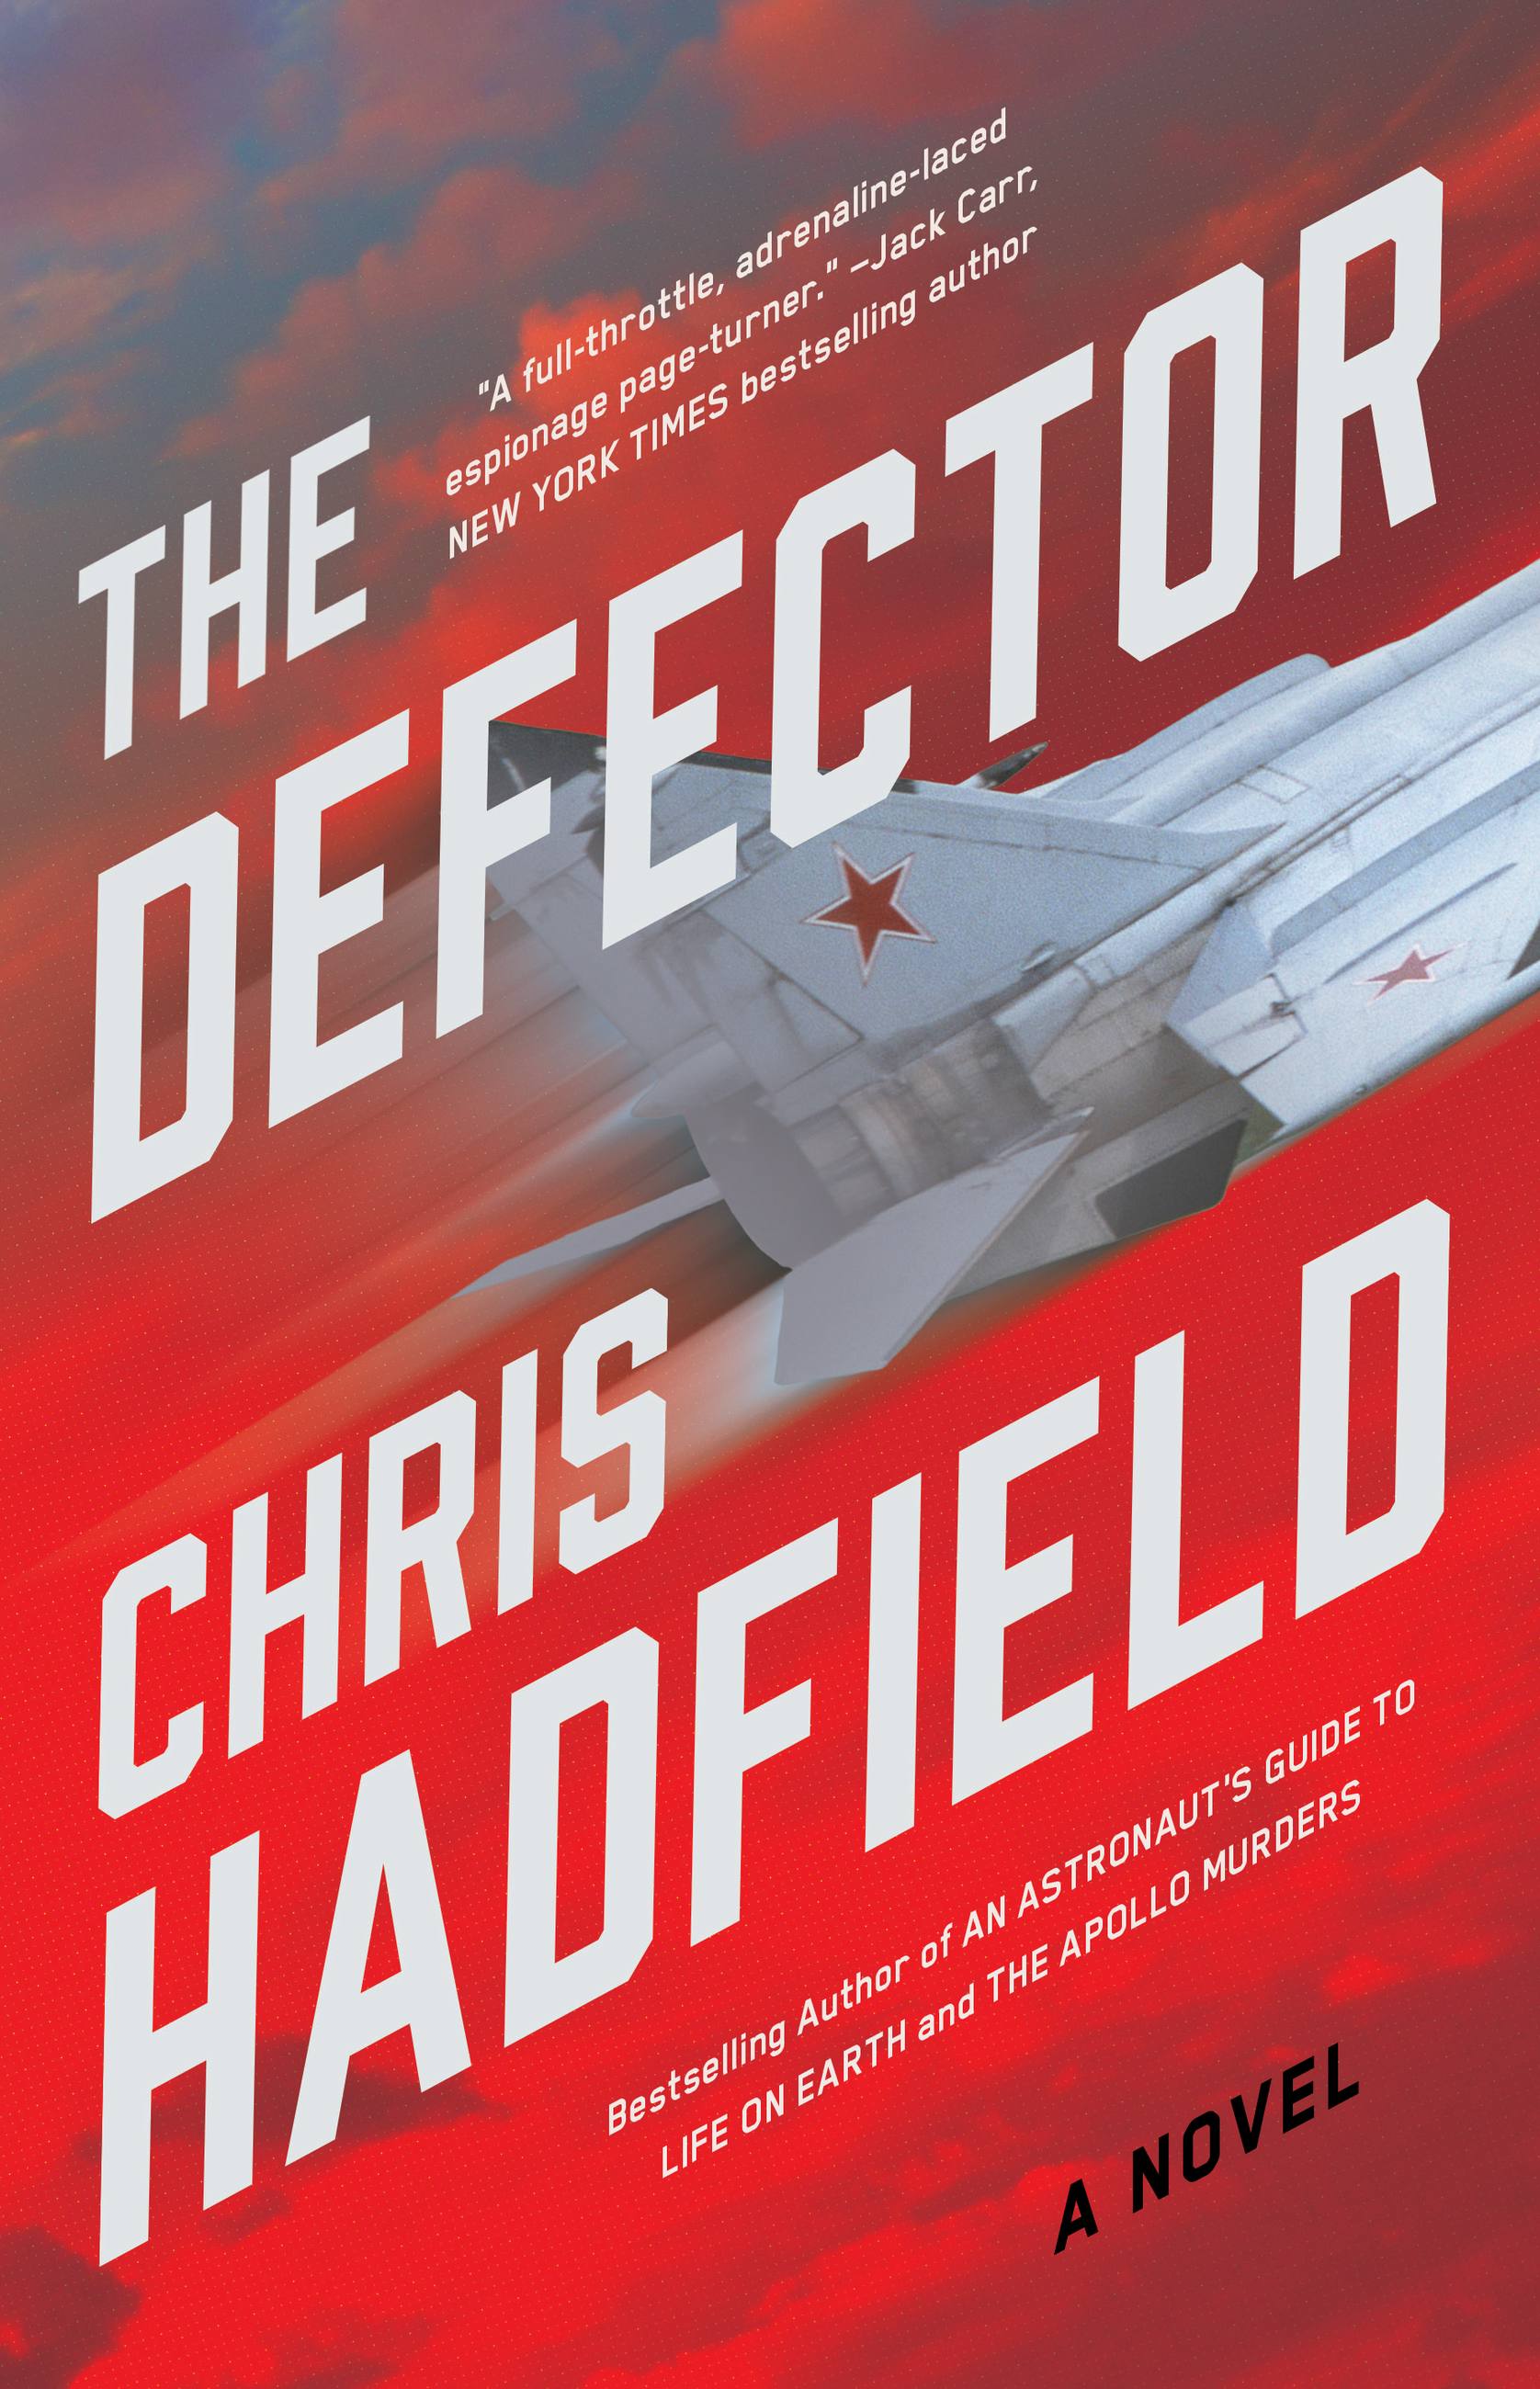 Cover image for The Defector [electronic resource] : A Novel